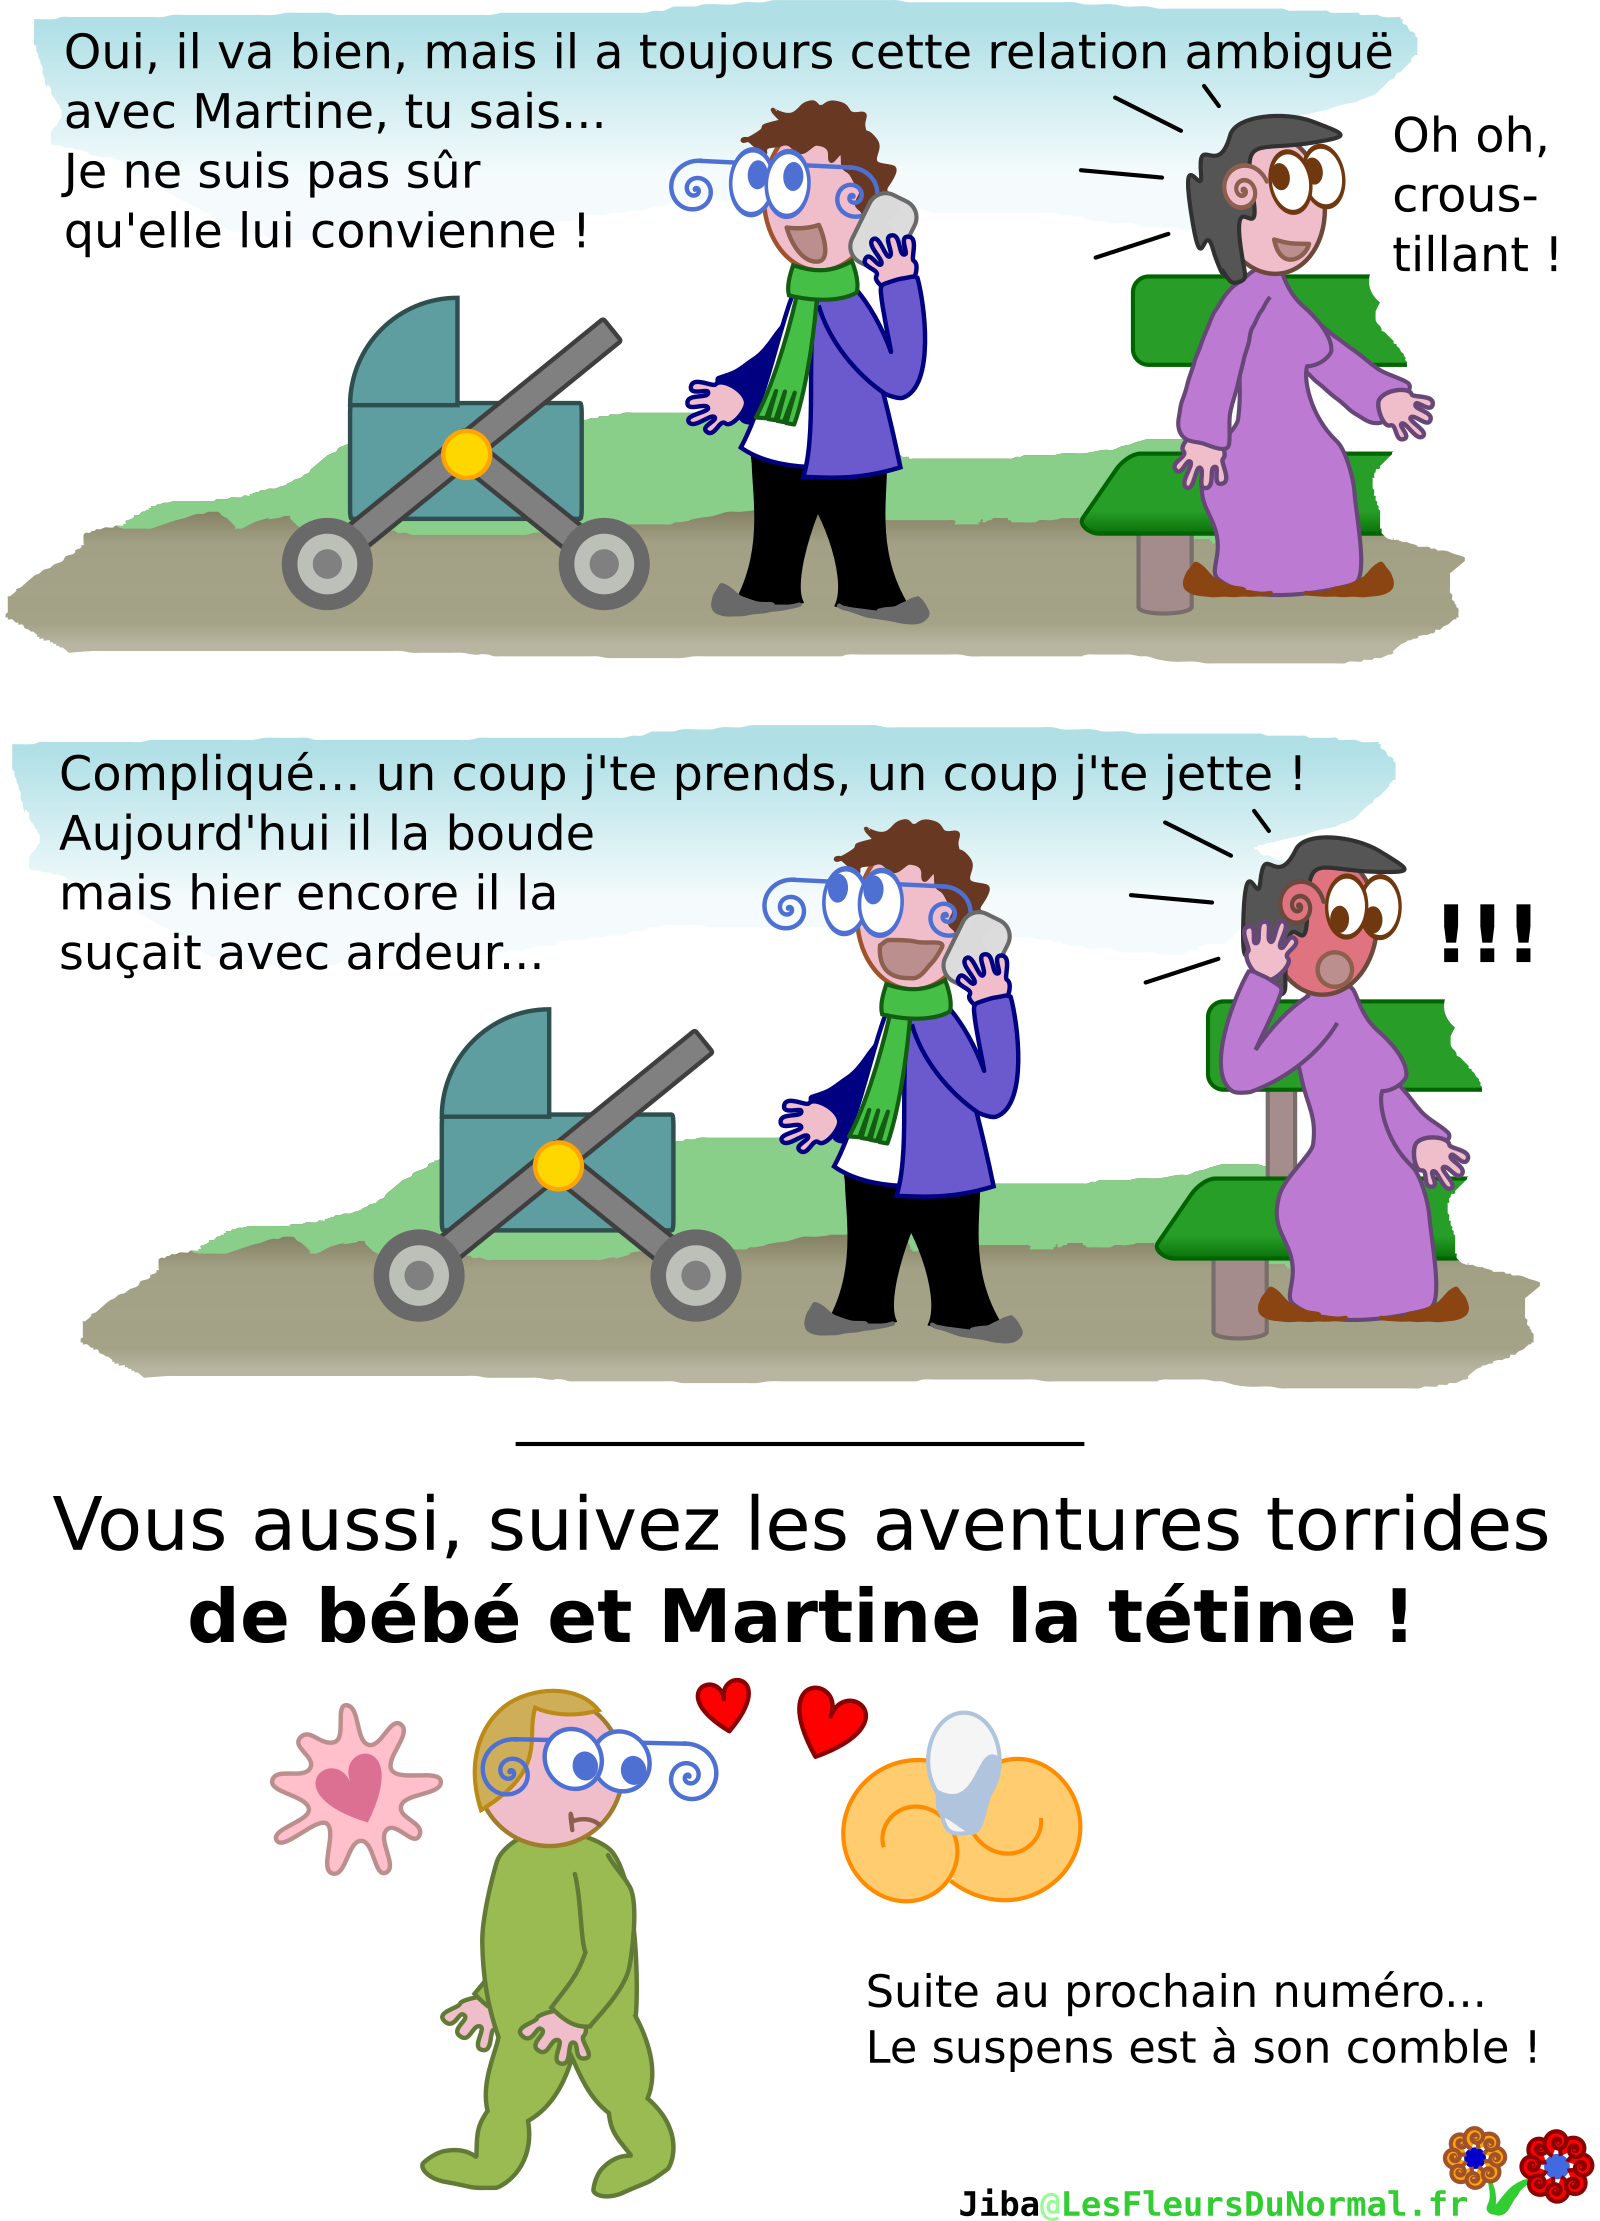 ../_images/martine.png